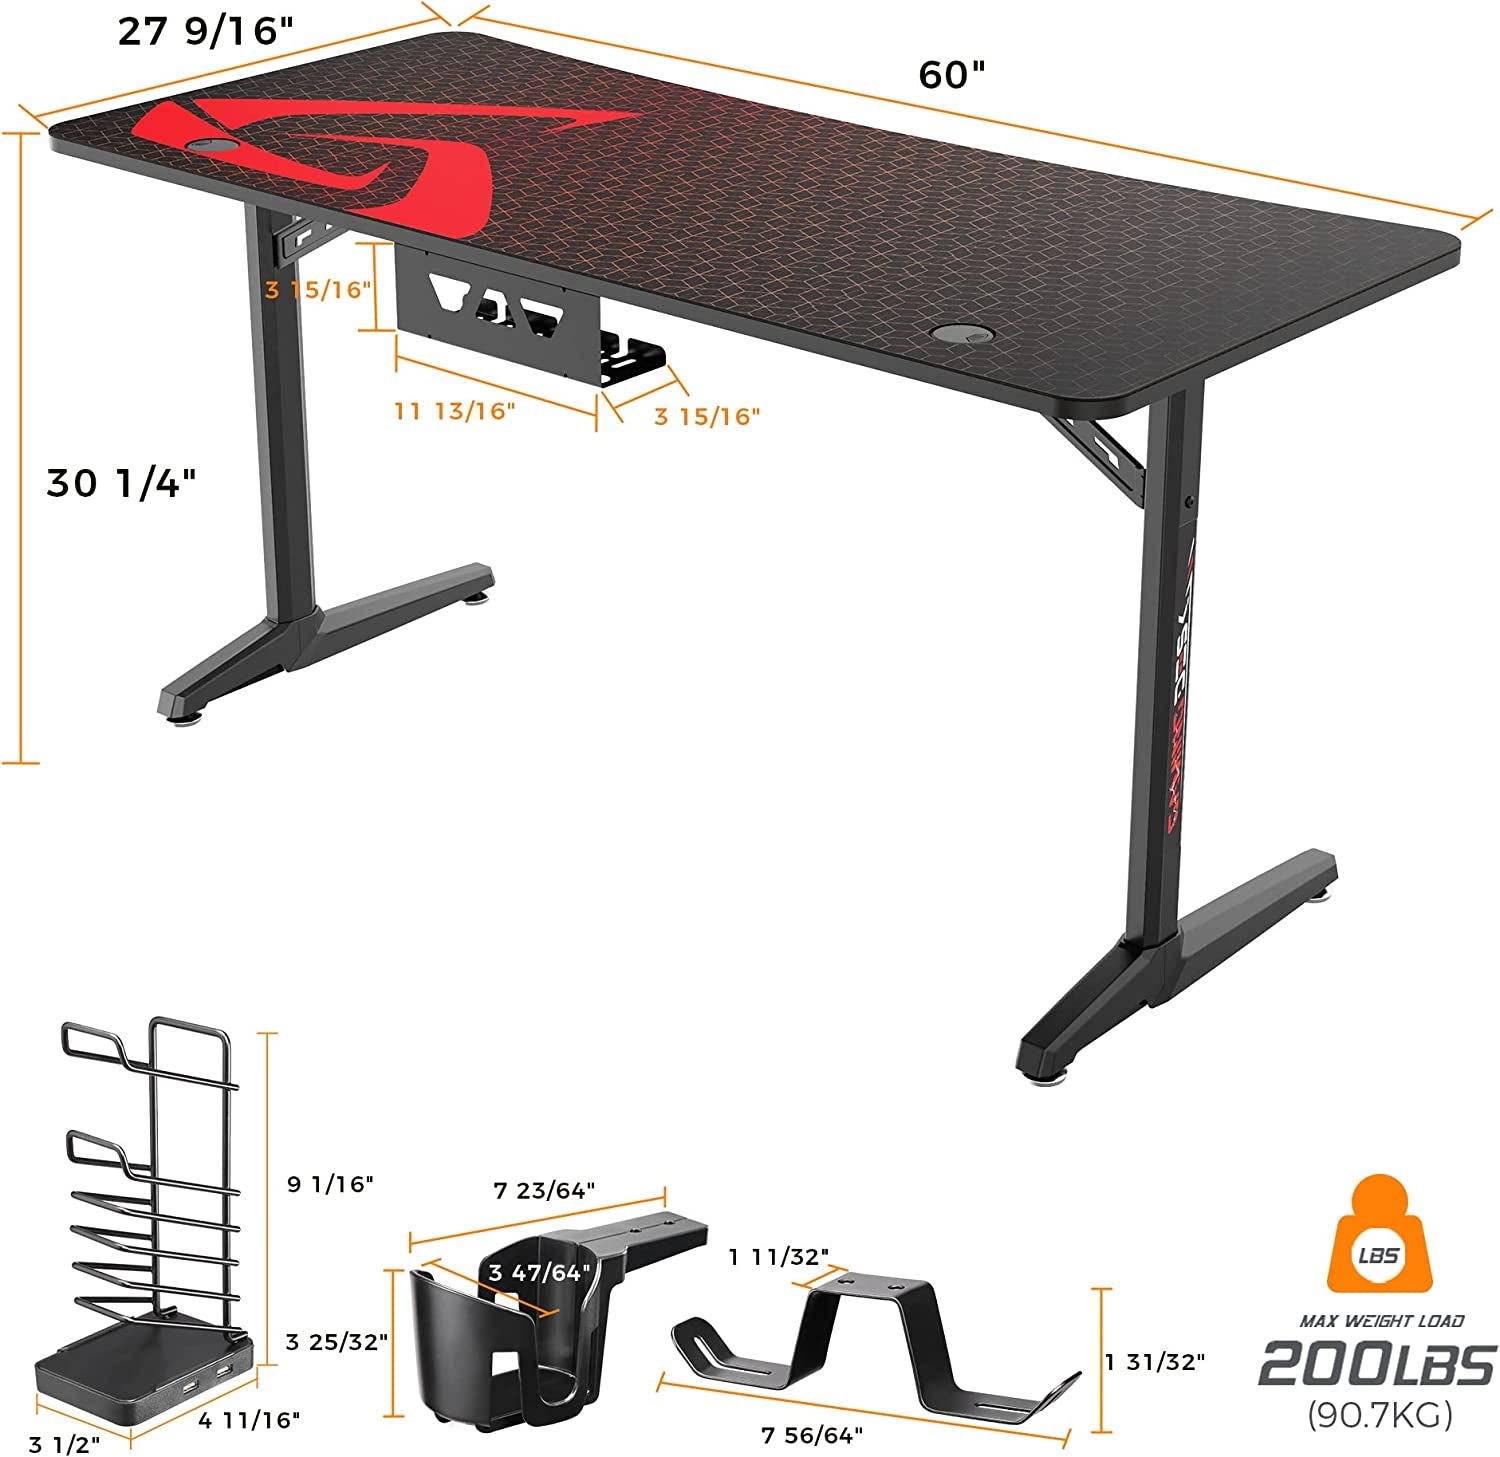 60 Inch Gaming Desk, Large Curved Computer Desk with Full Mouse Pad, T-Shaped Professional Gamer Studio Table for 3 Monitors with USB Handle Rack Cup Holder Headphone Hook, Carbon Fiber Black